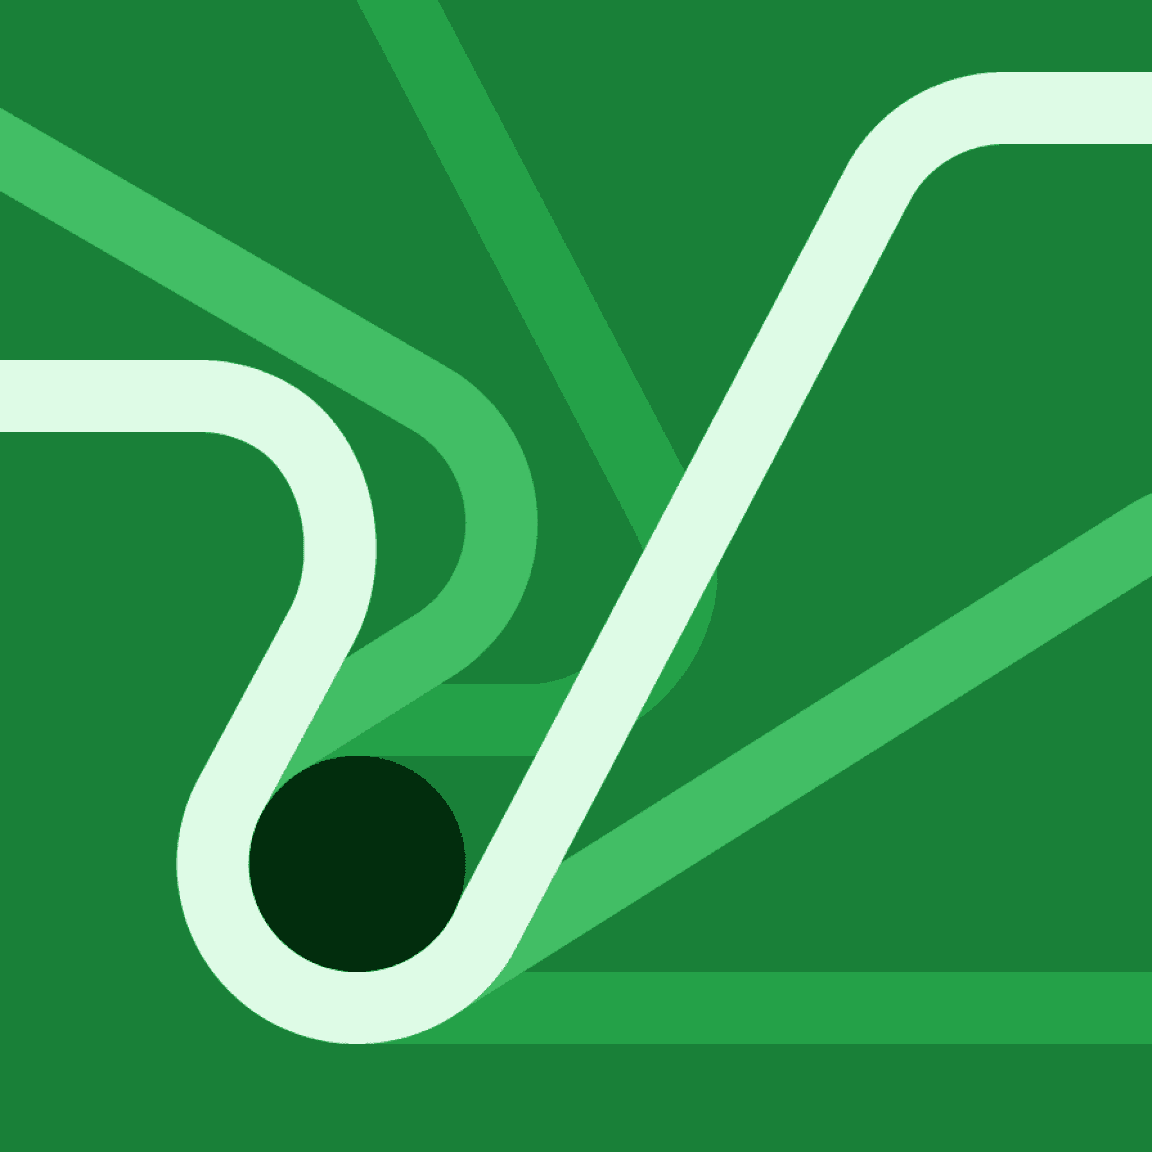 flat-style illustration in greens